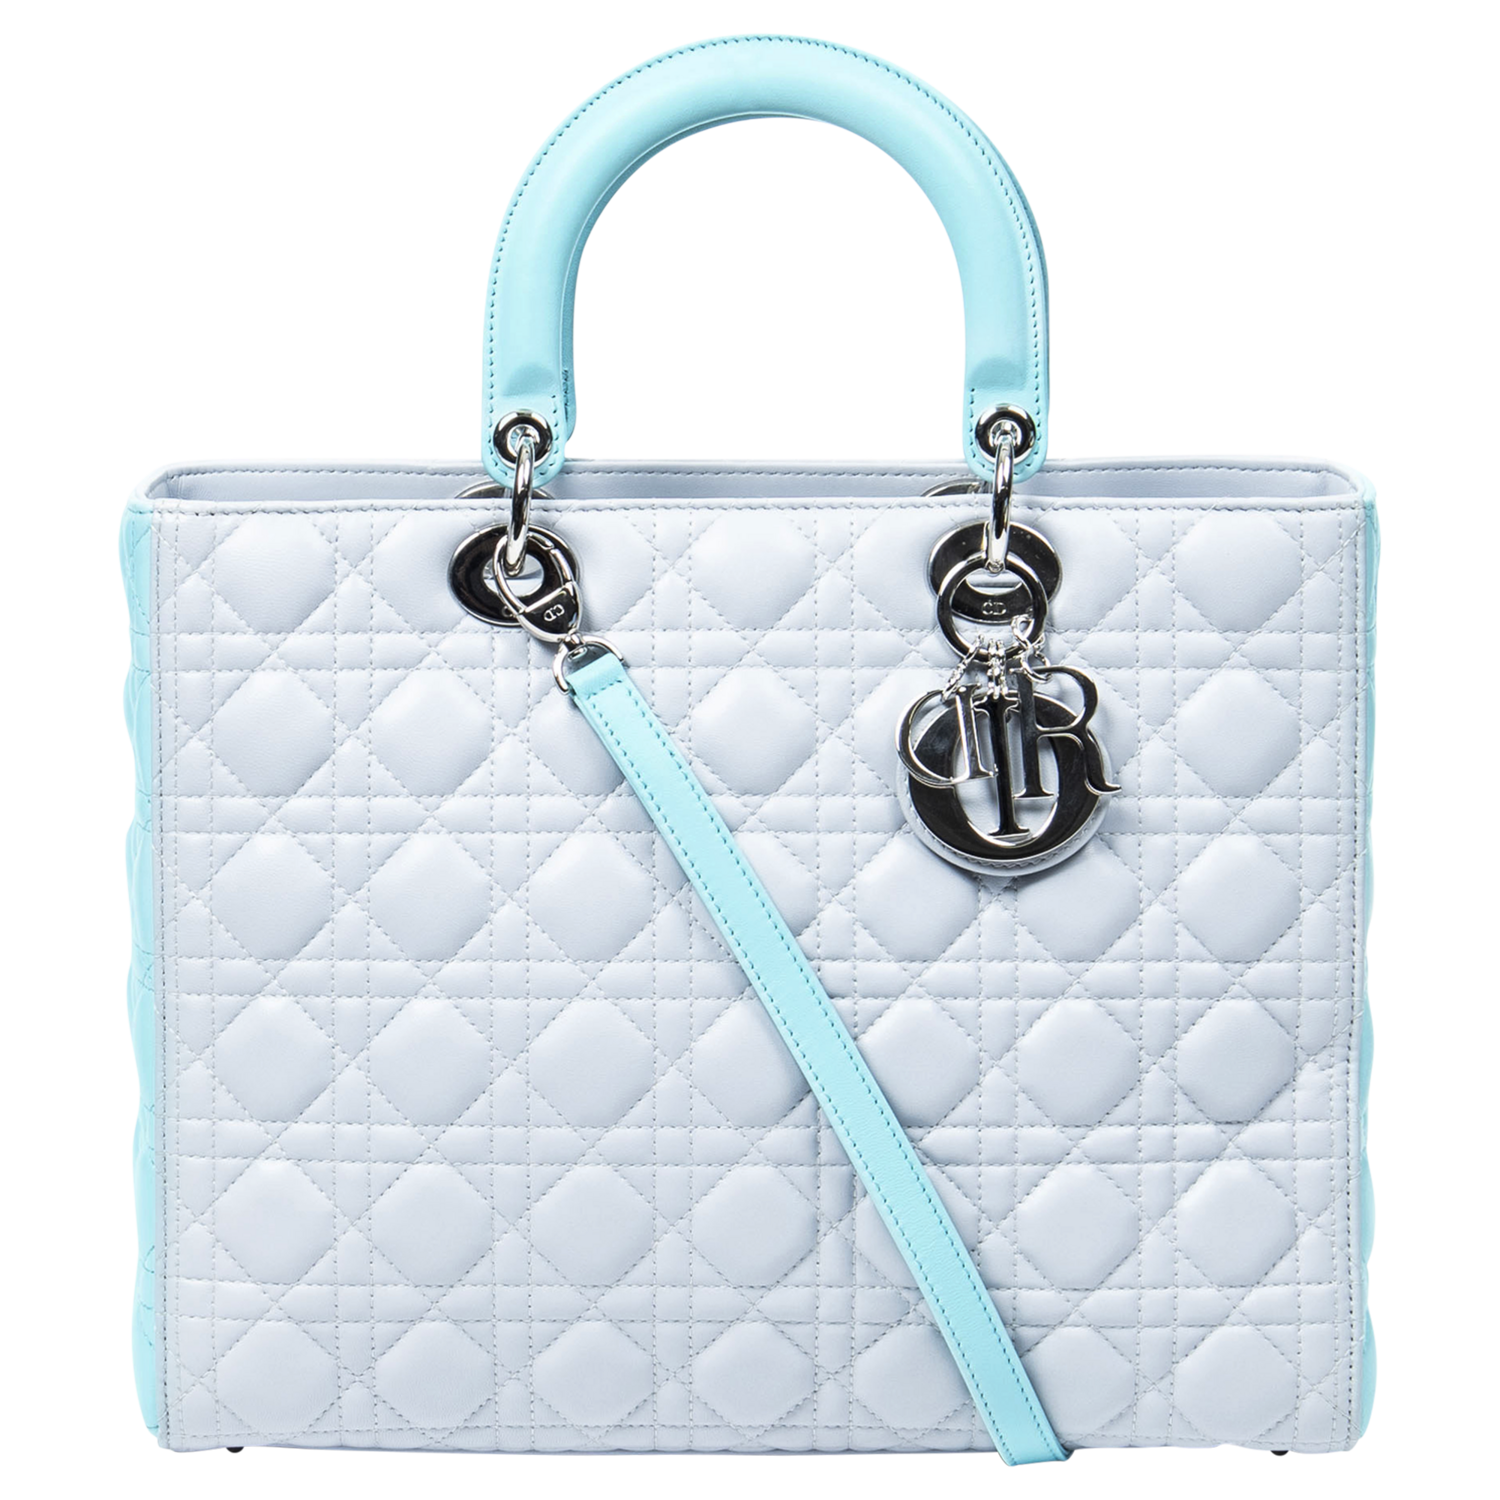 Dior Light Gray/Light Turquoise Large Bicolor Lady Dior